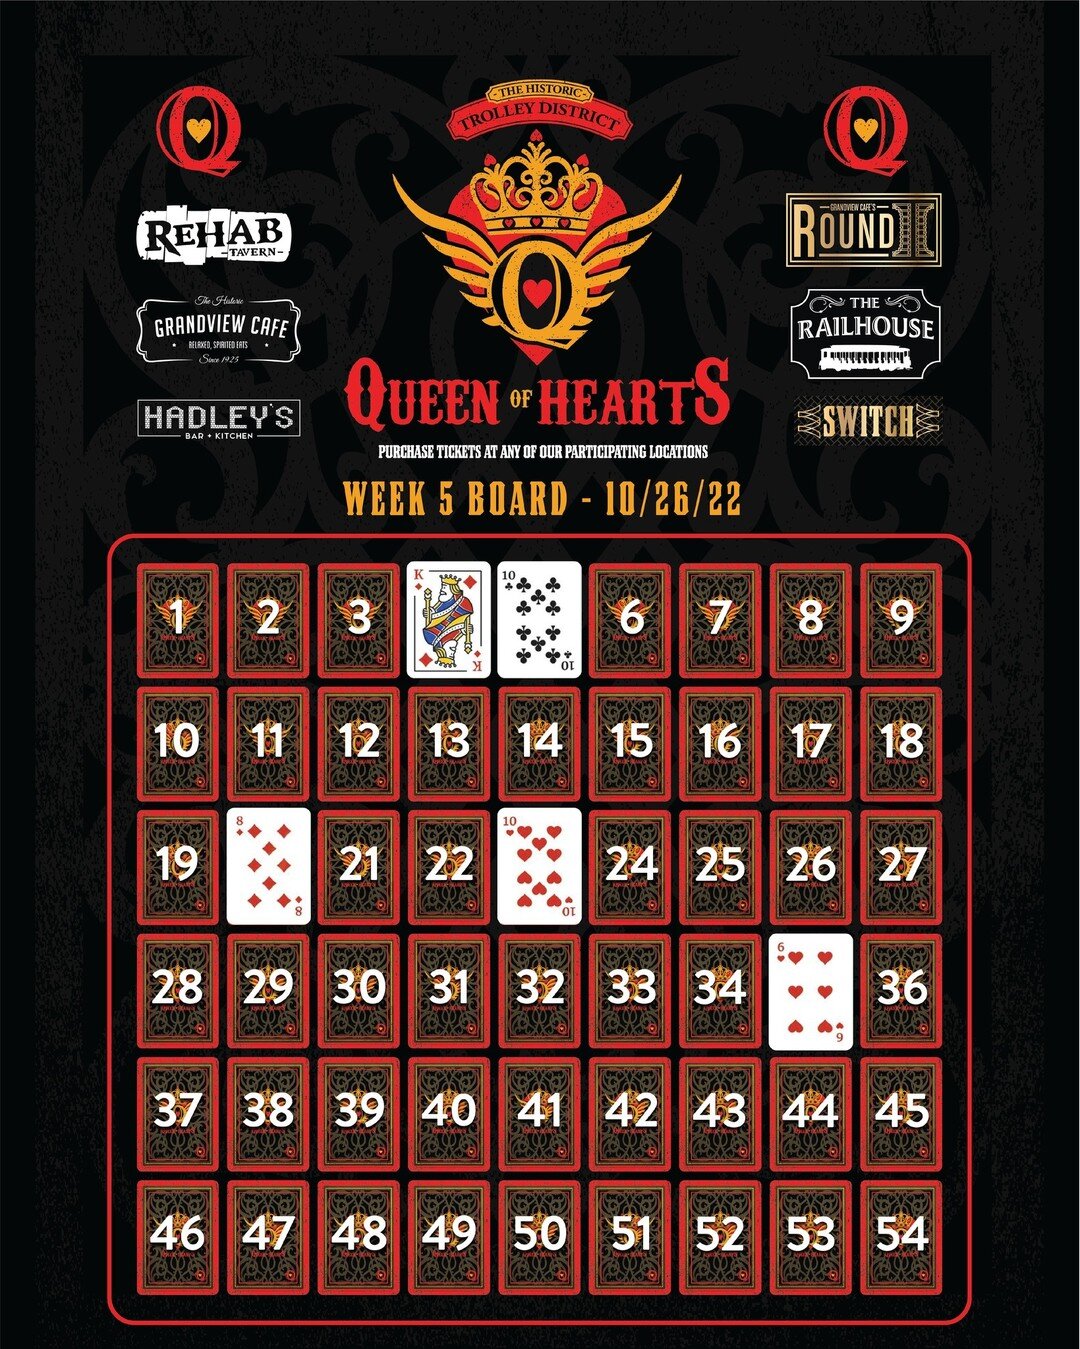 WEEK 5 - NO JACKPOT WINNER! | Week 5 is in the books! Last night card number 20 was turned over and found NOT to be the Queen Of Hearts. THE GAME GOES ON! Congrats to all of our drawing winners last night with over $1,000 in cash prizes given out! 

